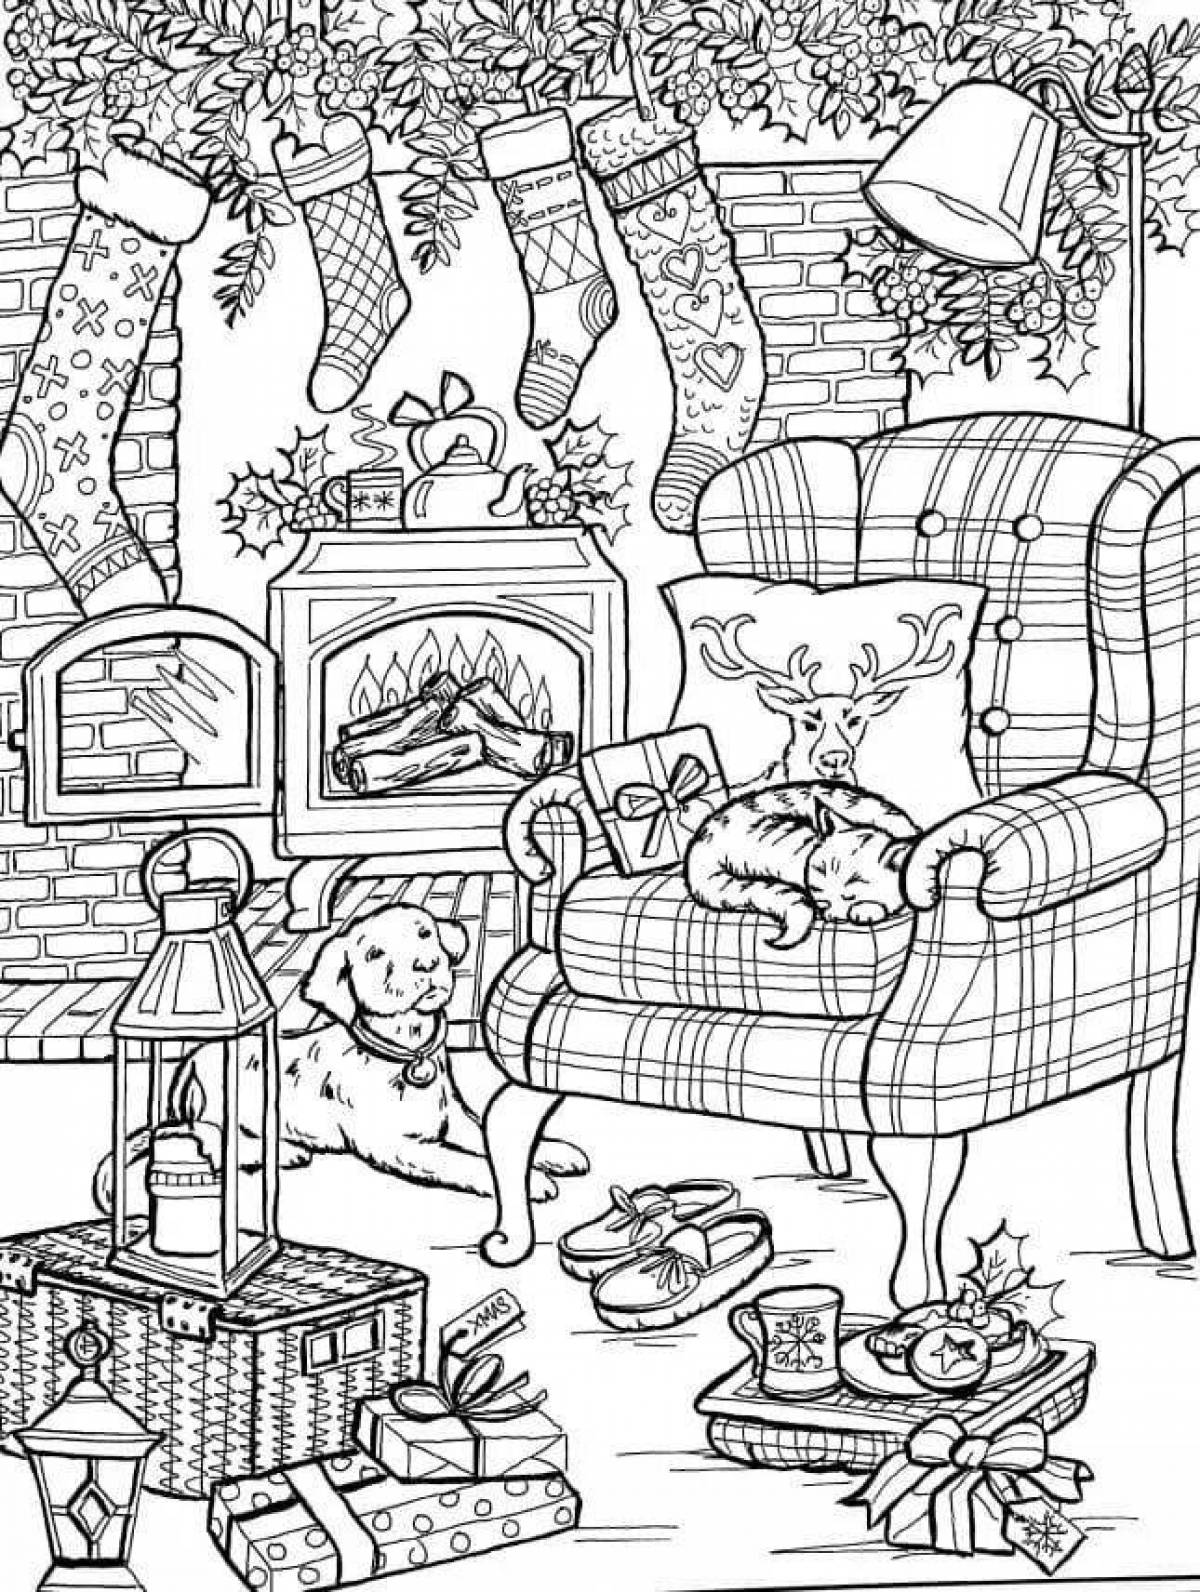 Merry Christmas room coloring book